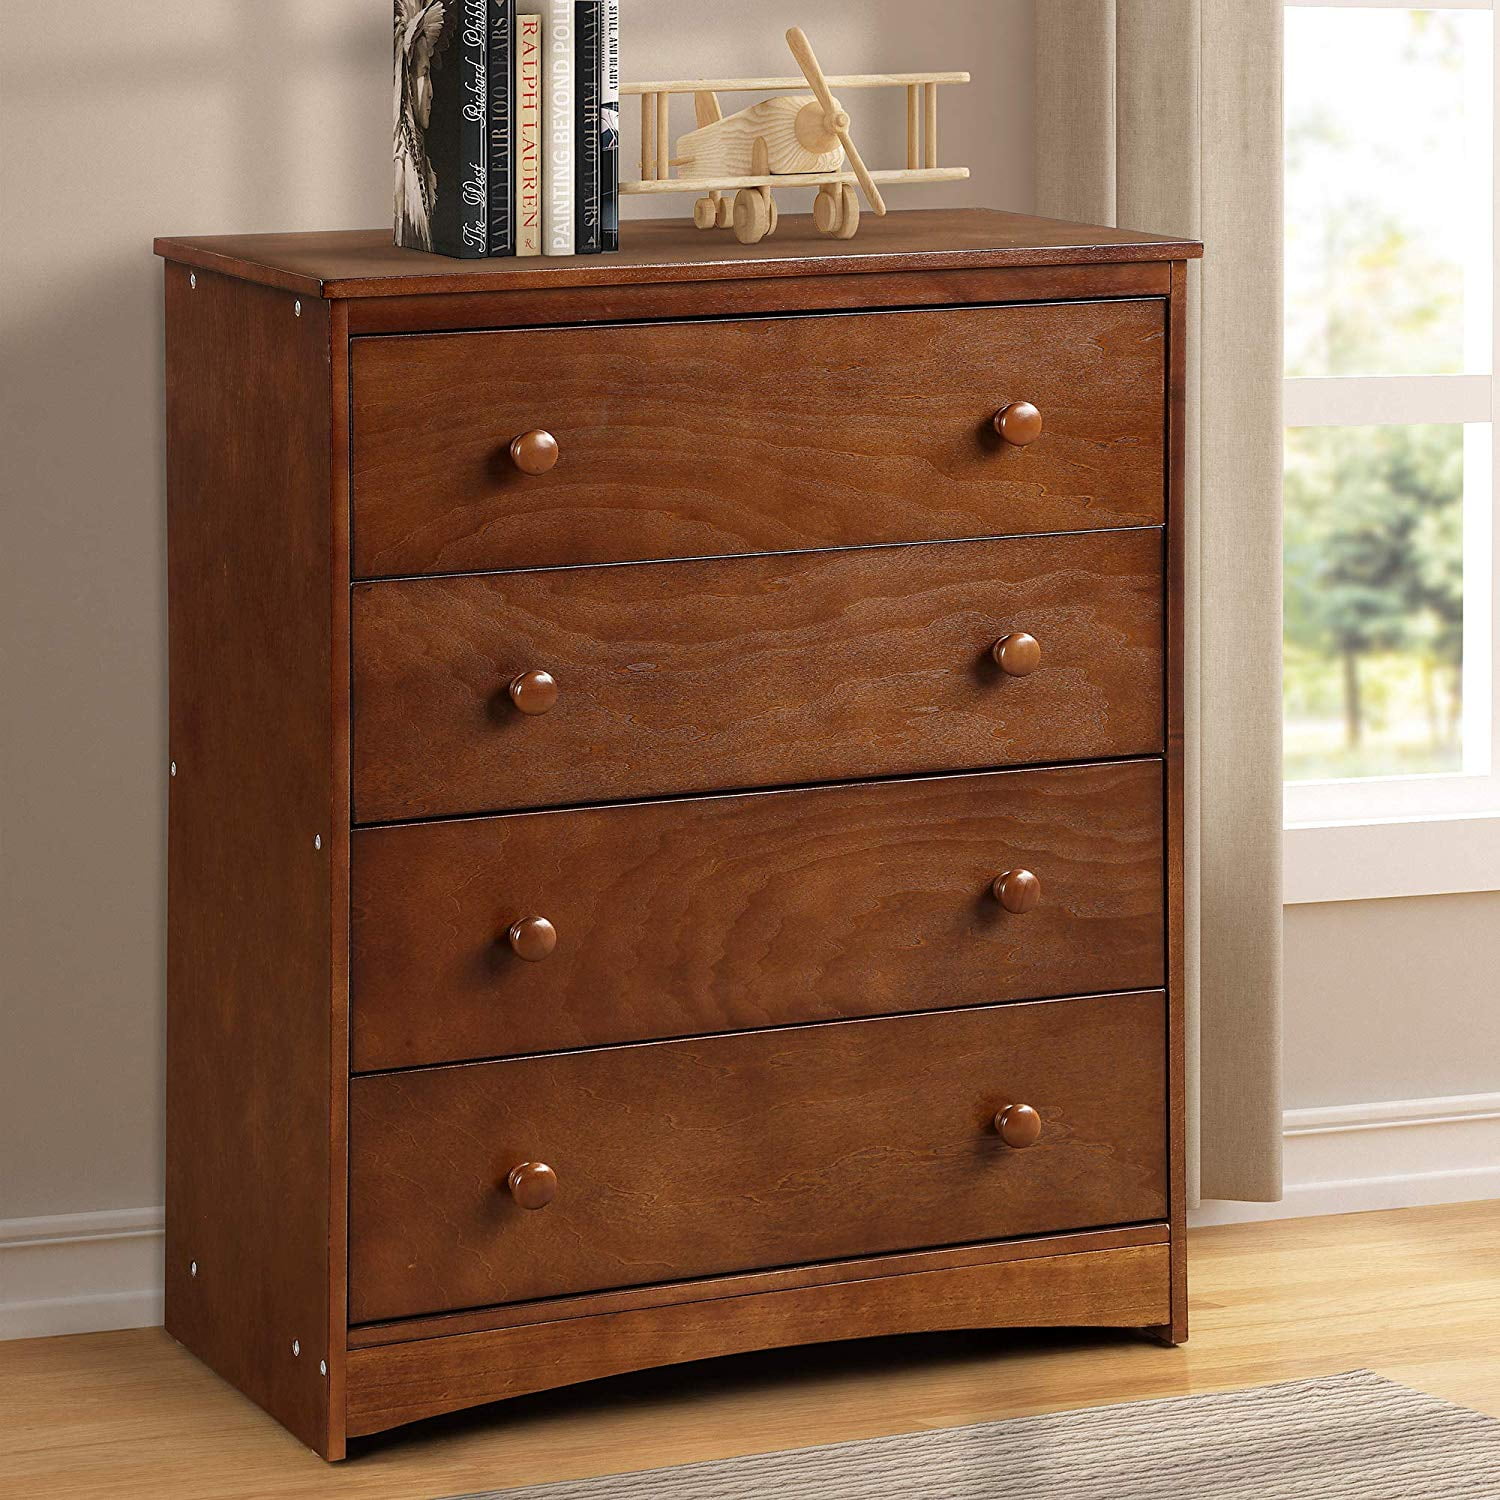 Harper Bright Designs Bedroom Dresser With 4 Drawers Wood Chest